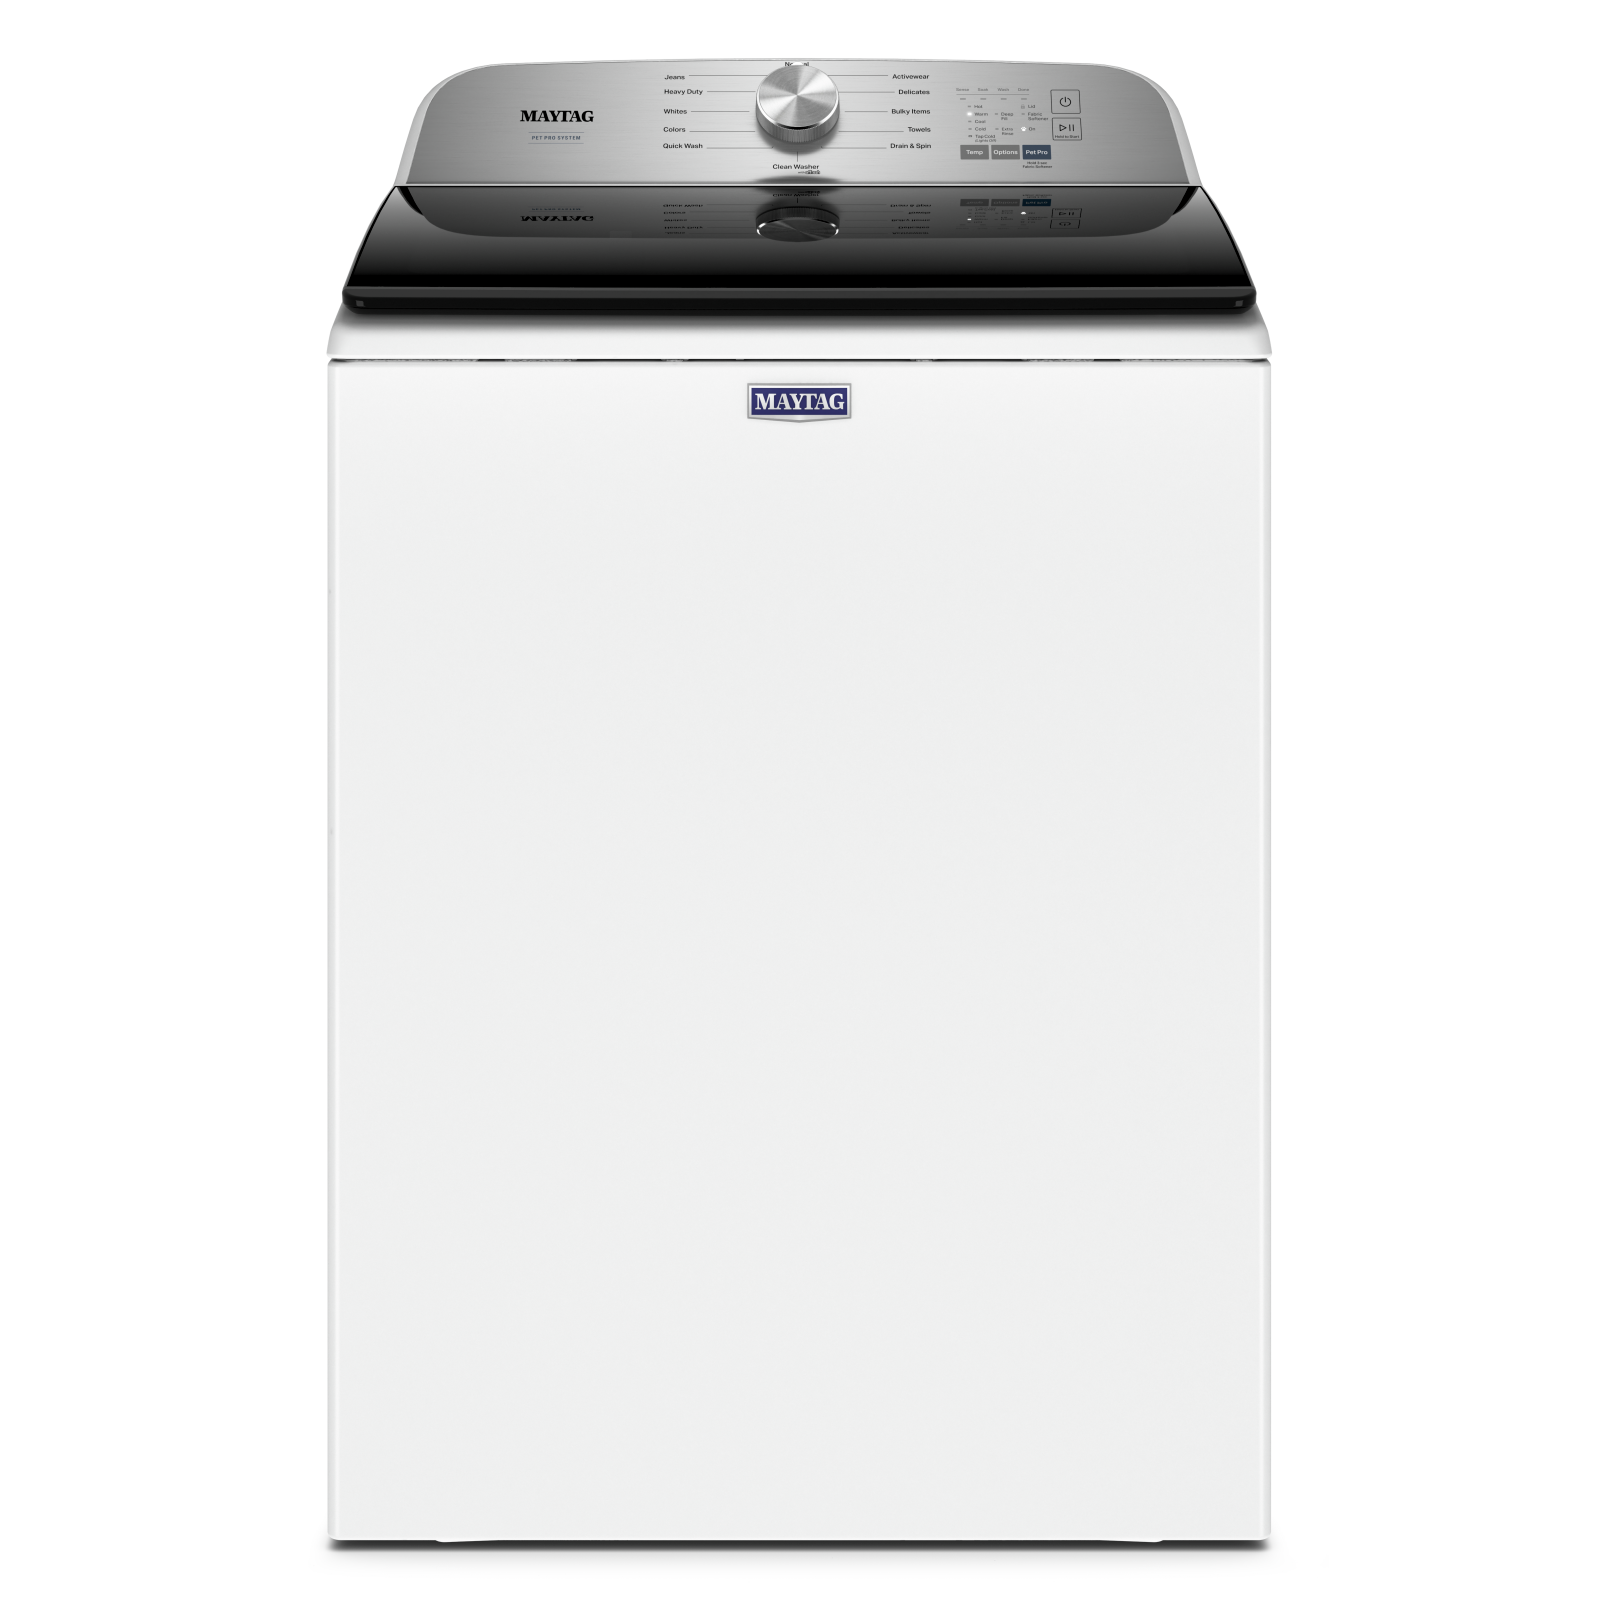 Maytag - 5.4 cu. Ft  Top Load Washer in White - MVW6500MW